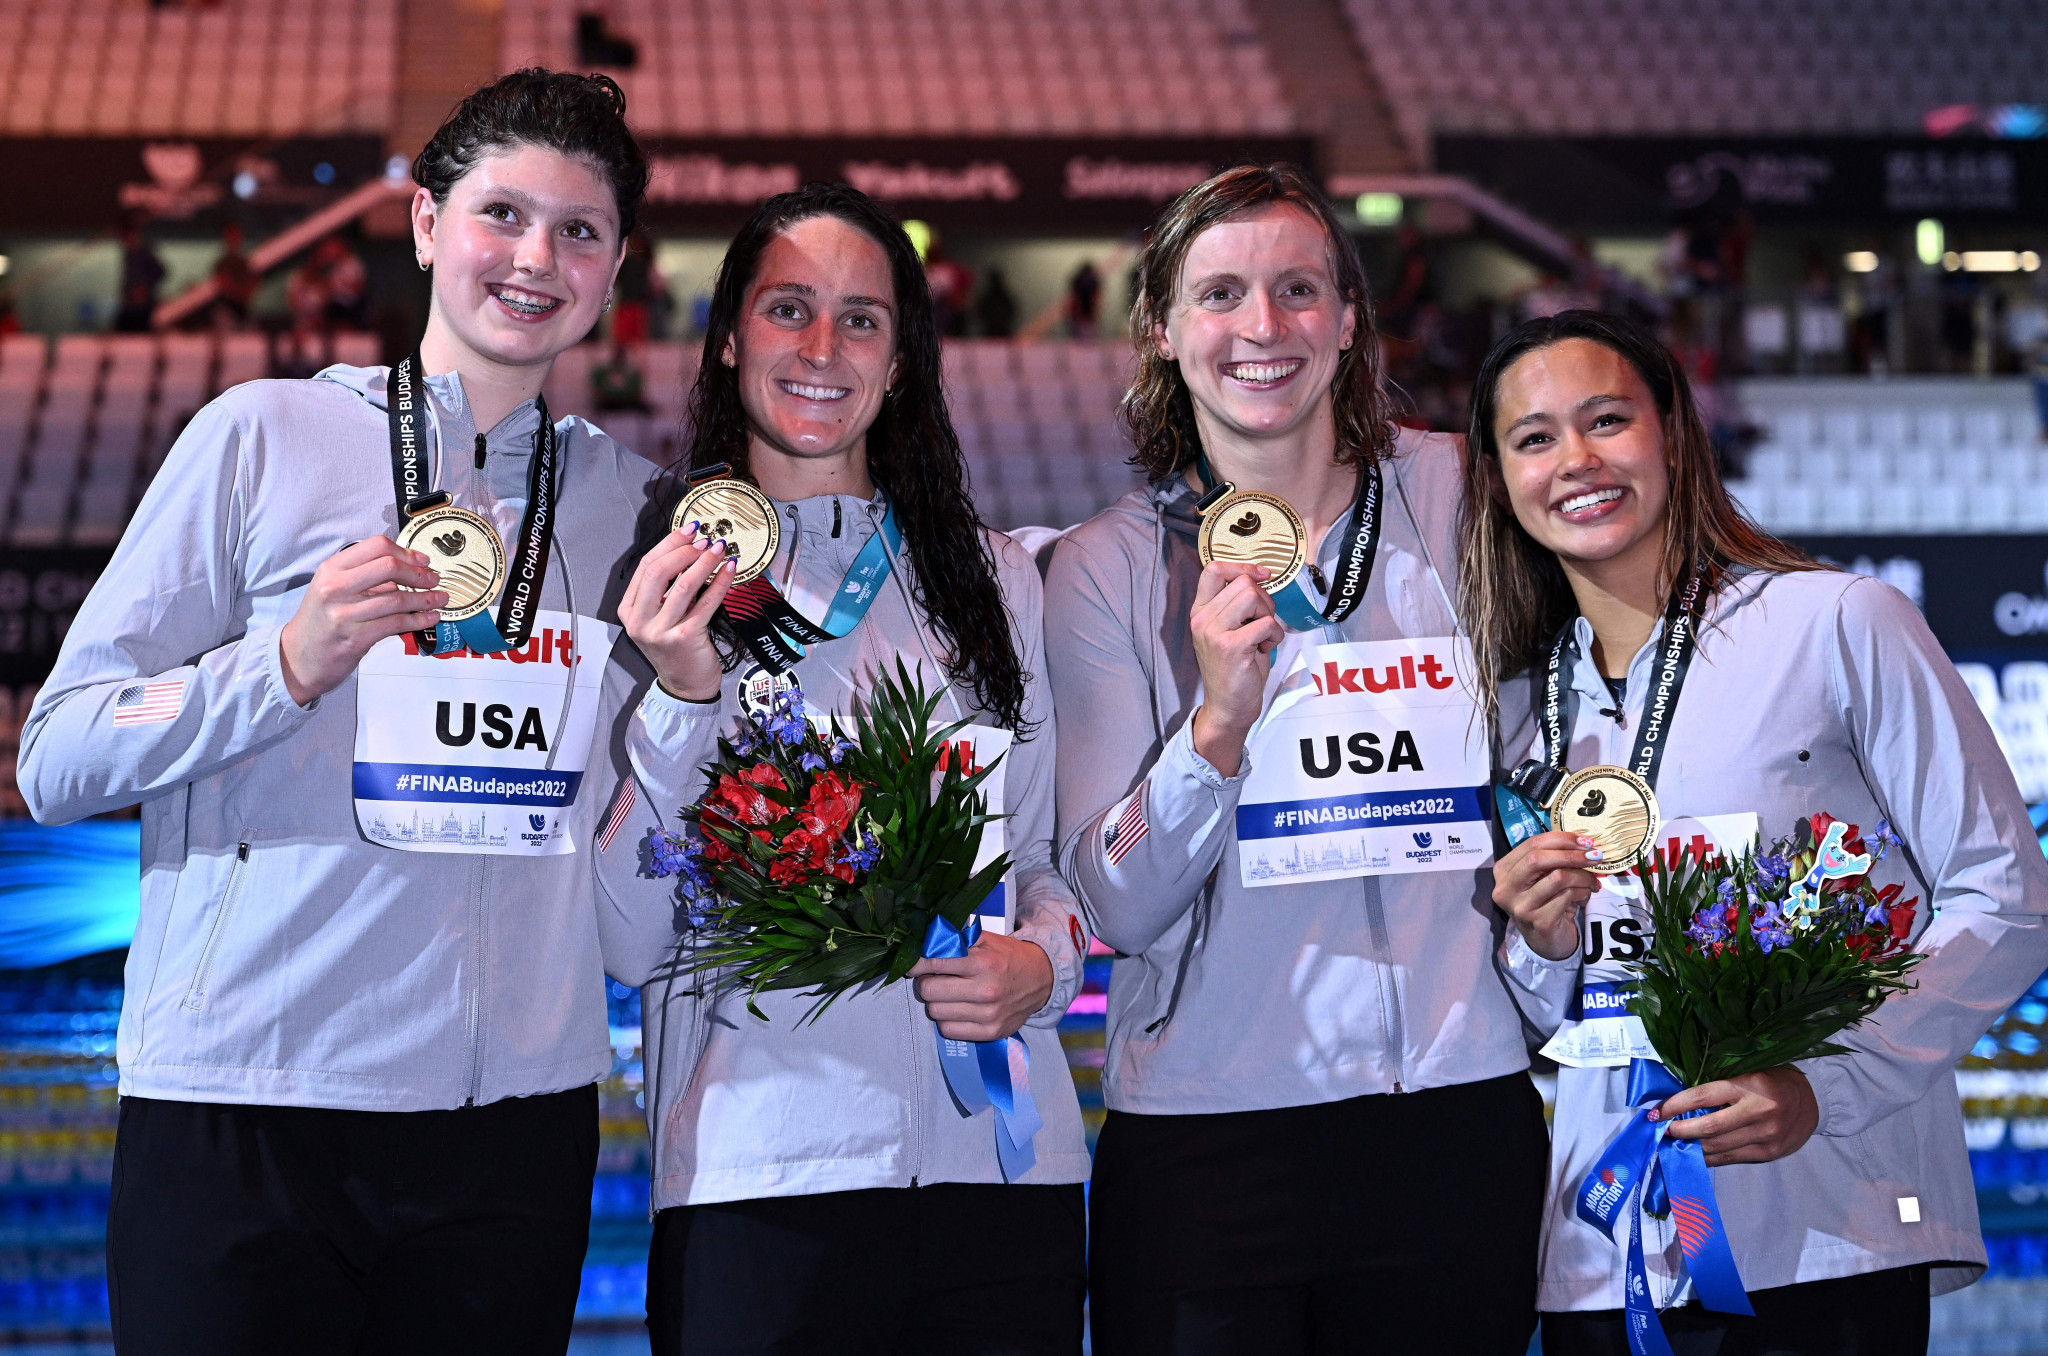 Claire Weinstein, furthest left, Leah Smith, second left, Katie Ledecky, second right and Bella Sims, furthest right, set a women's 4x200m freestyle relay Championships record time of 7:41.45 for the United States ©Getty Images